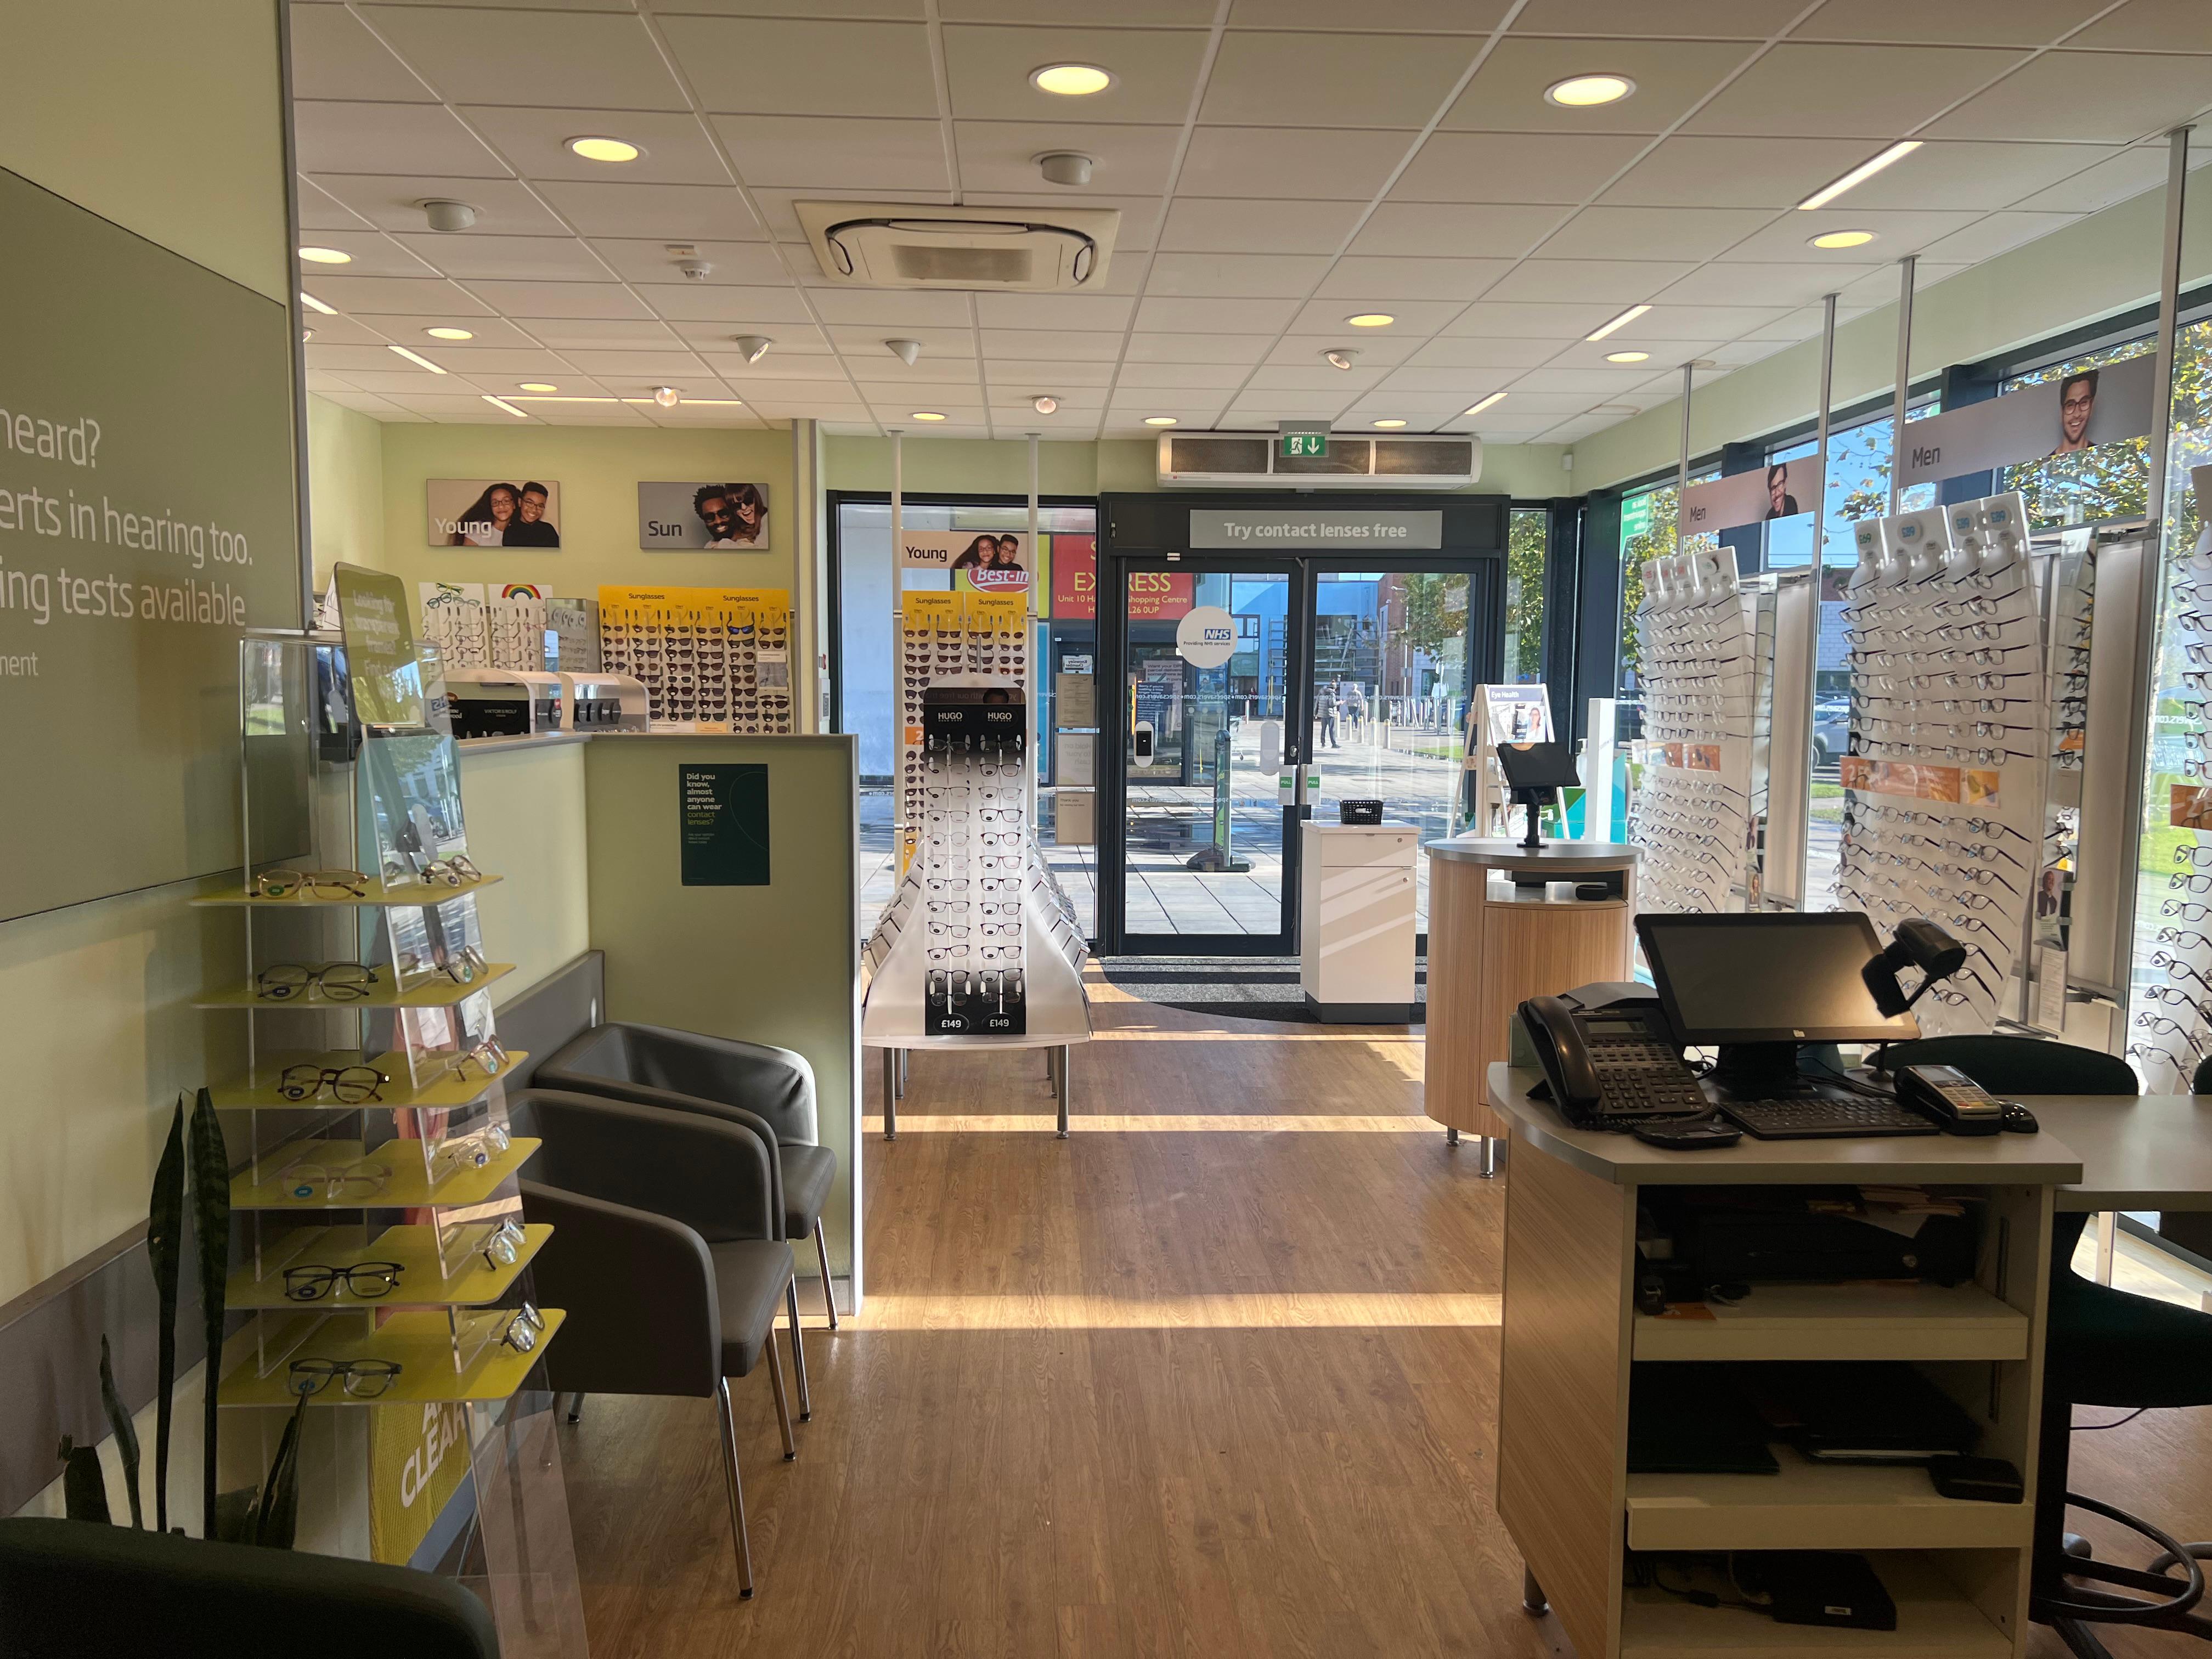 Images Specsavers Opticians and Audiologists - Halewood